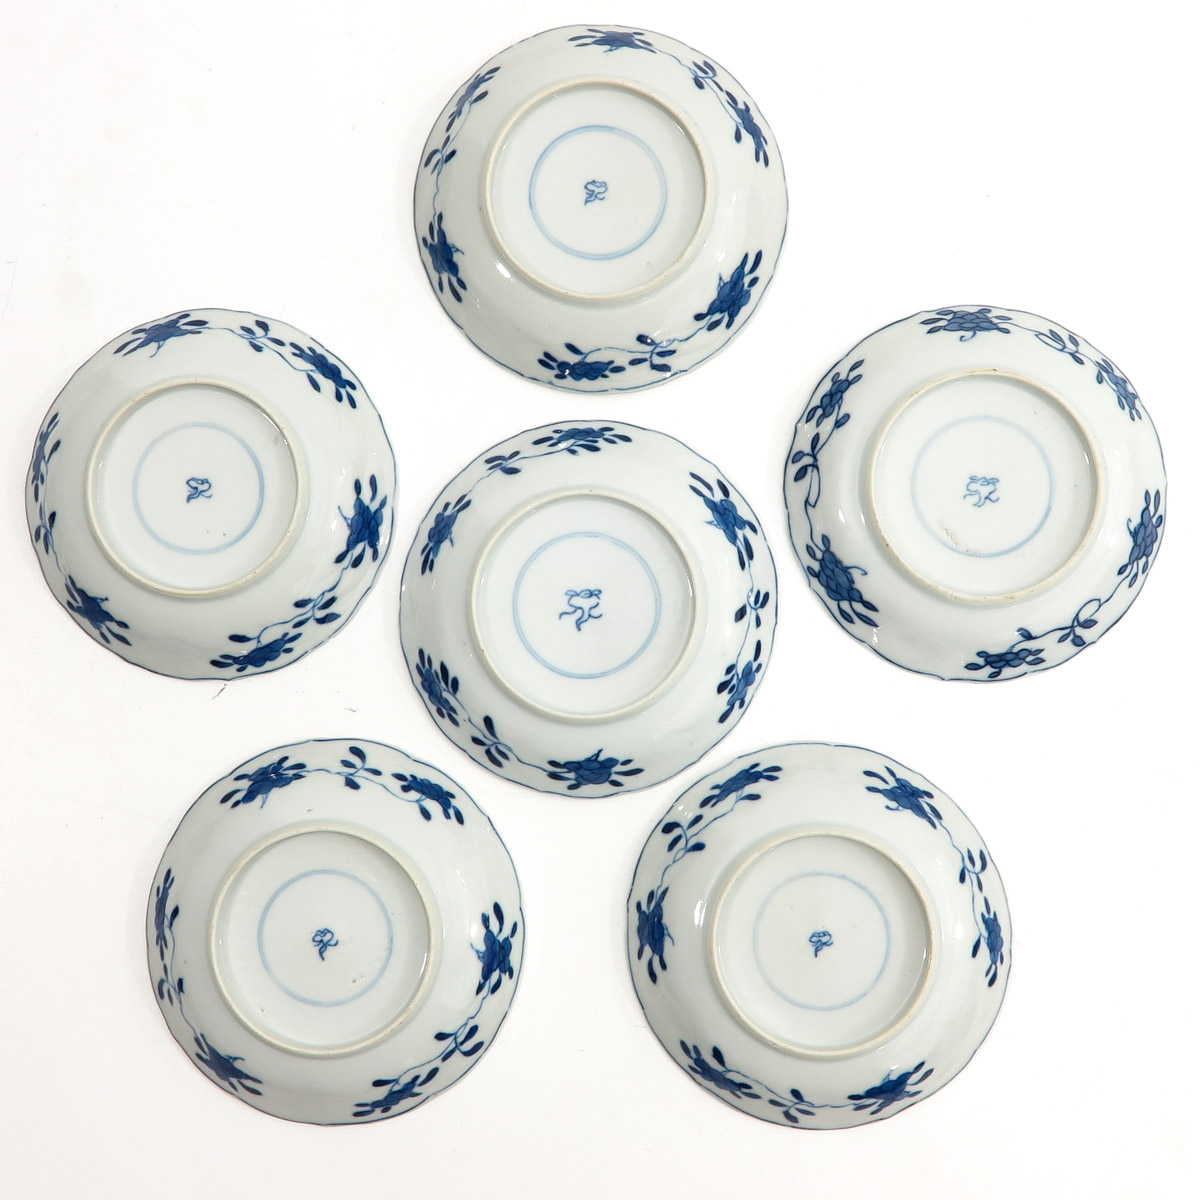 A Set of 6 Cups and Saucers - Image 8 of 10